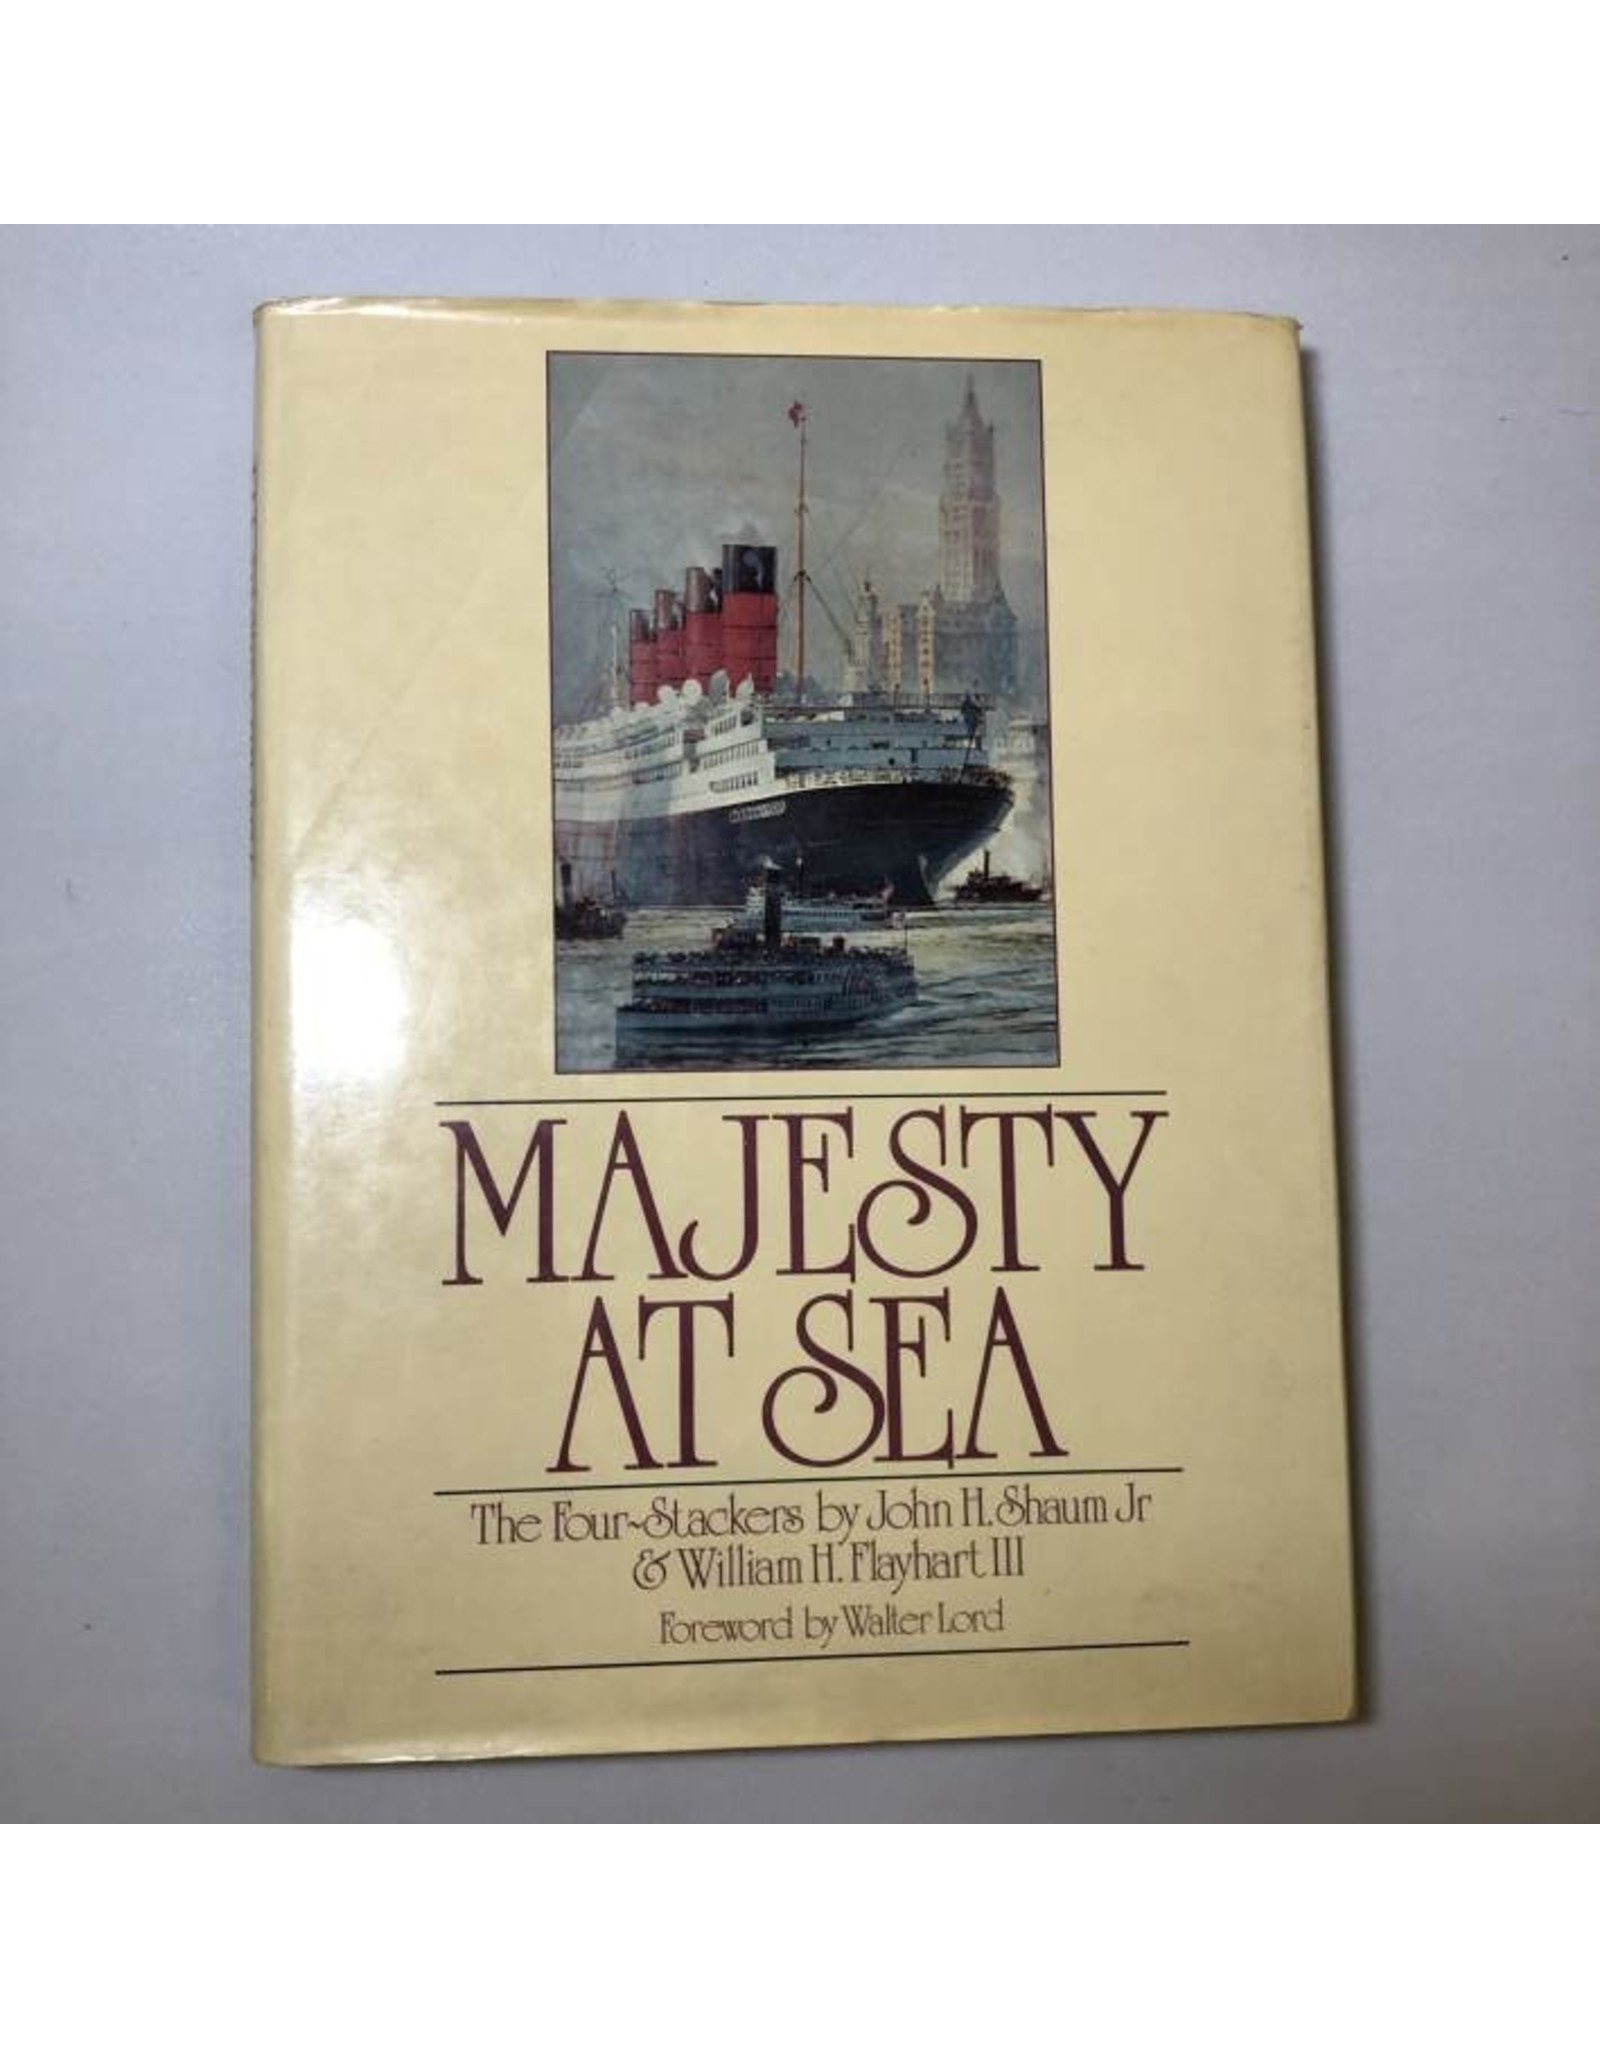 Hardcover book - Majesty at Sea